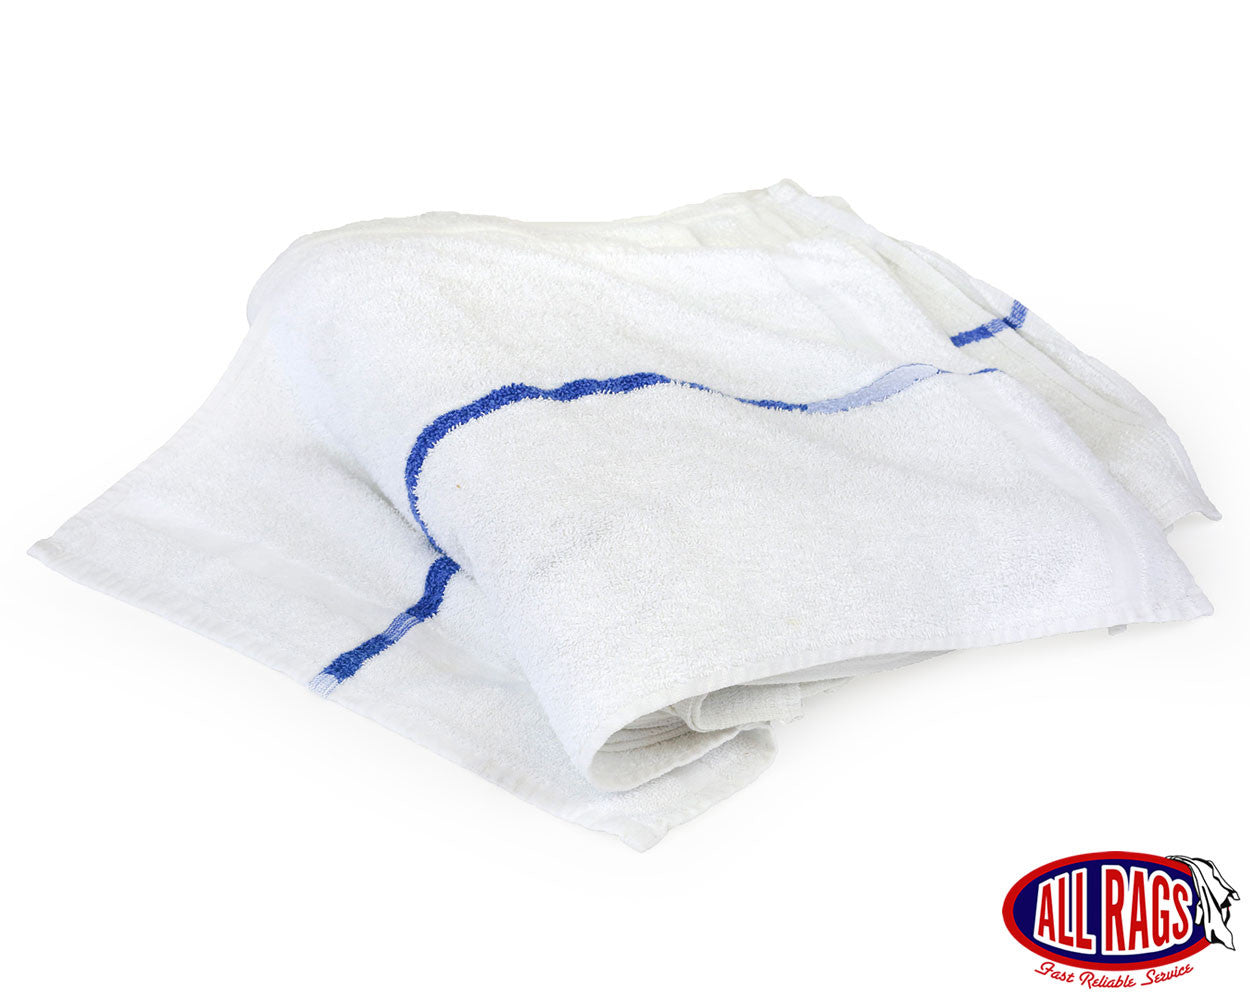 New White Terry Gym Towel with Blue Center Stripe